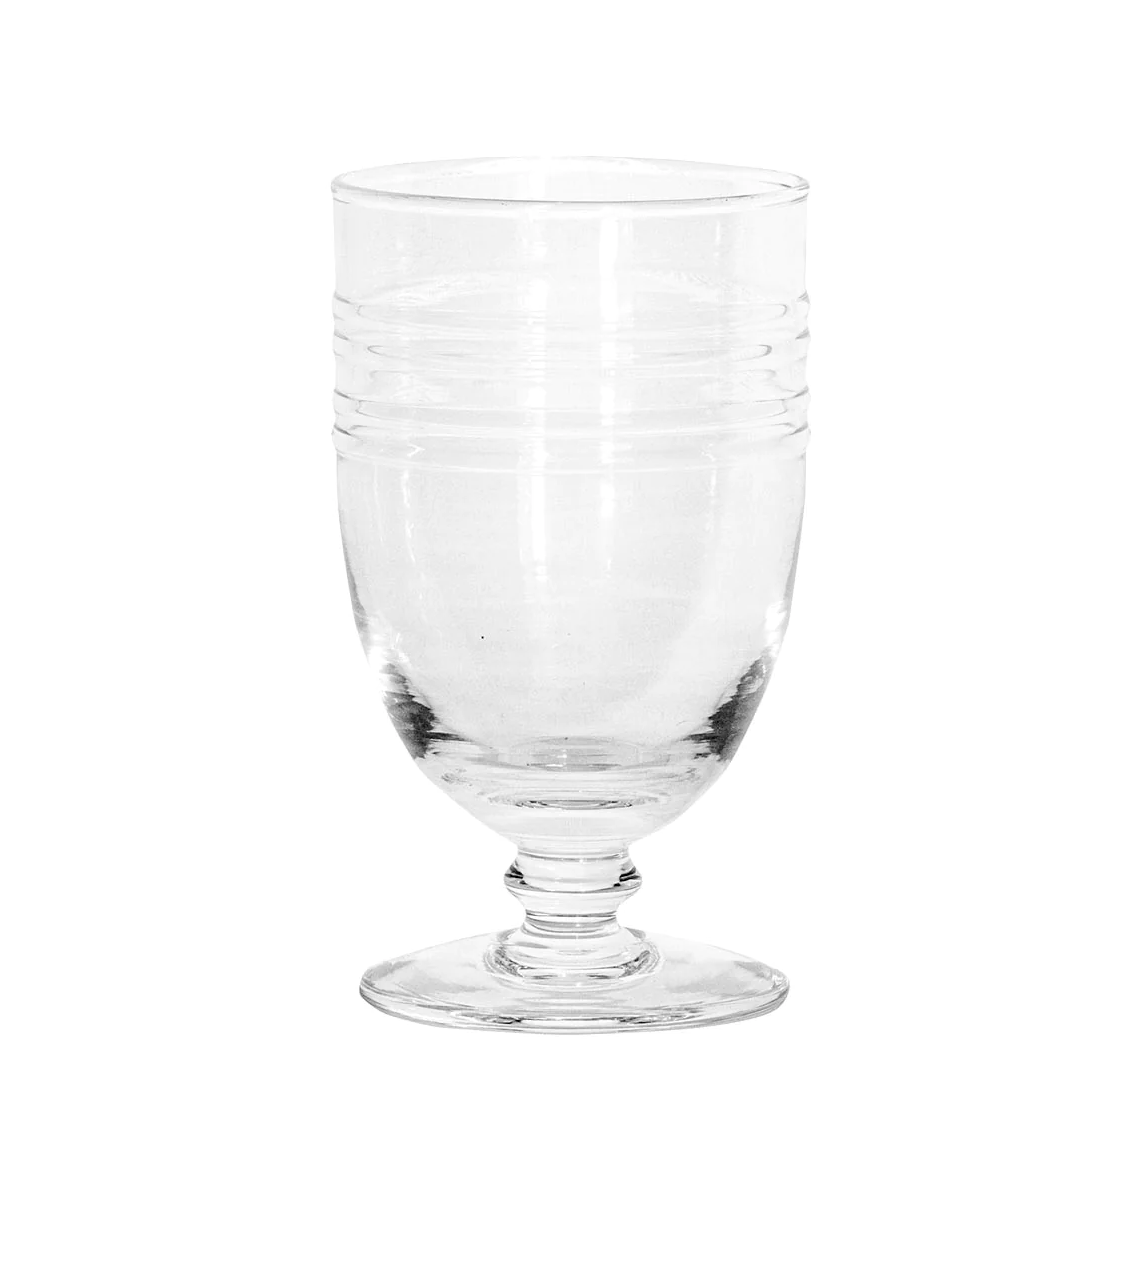 Bilbao Footed Goblet